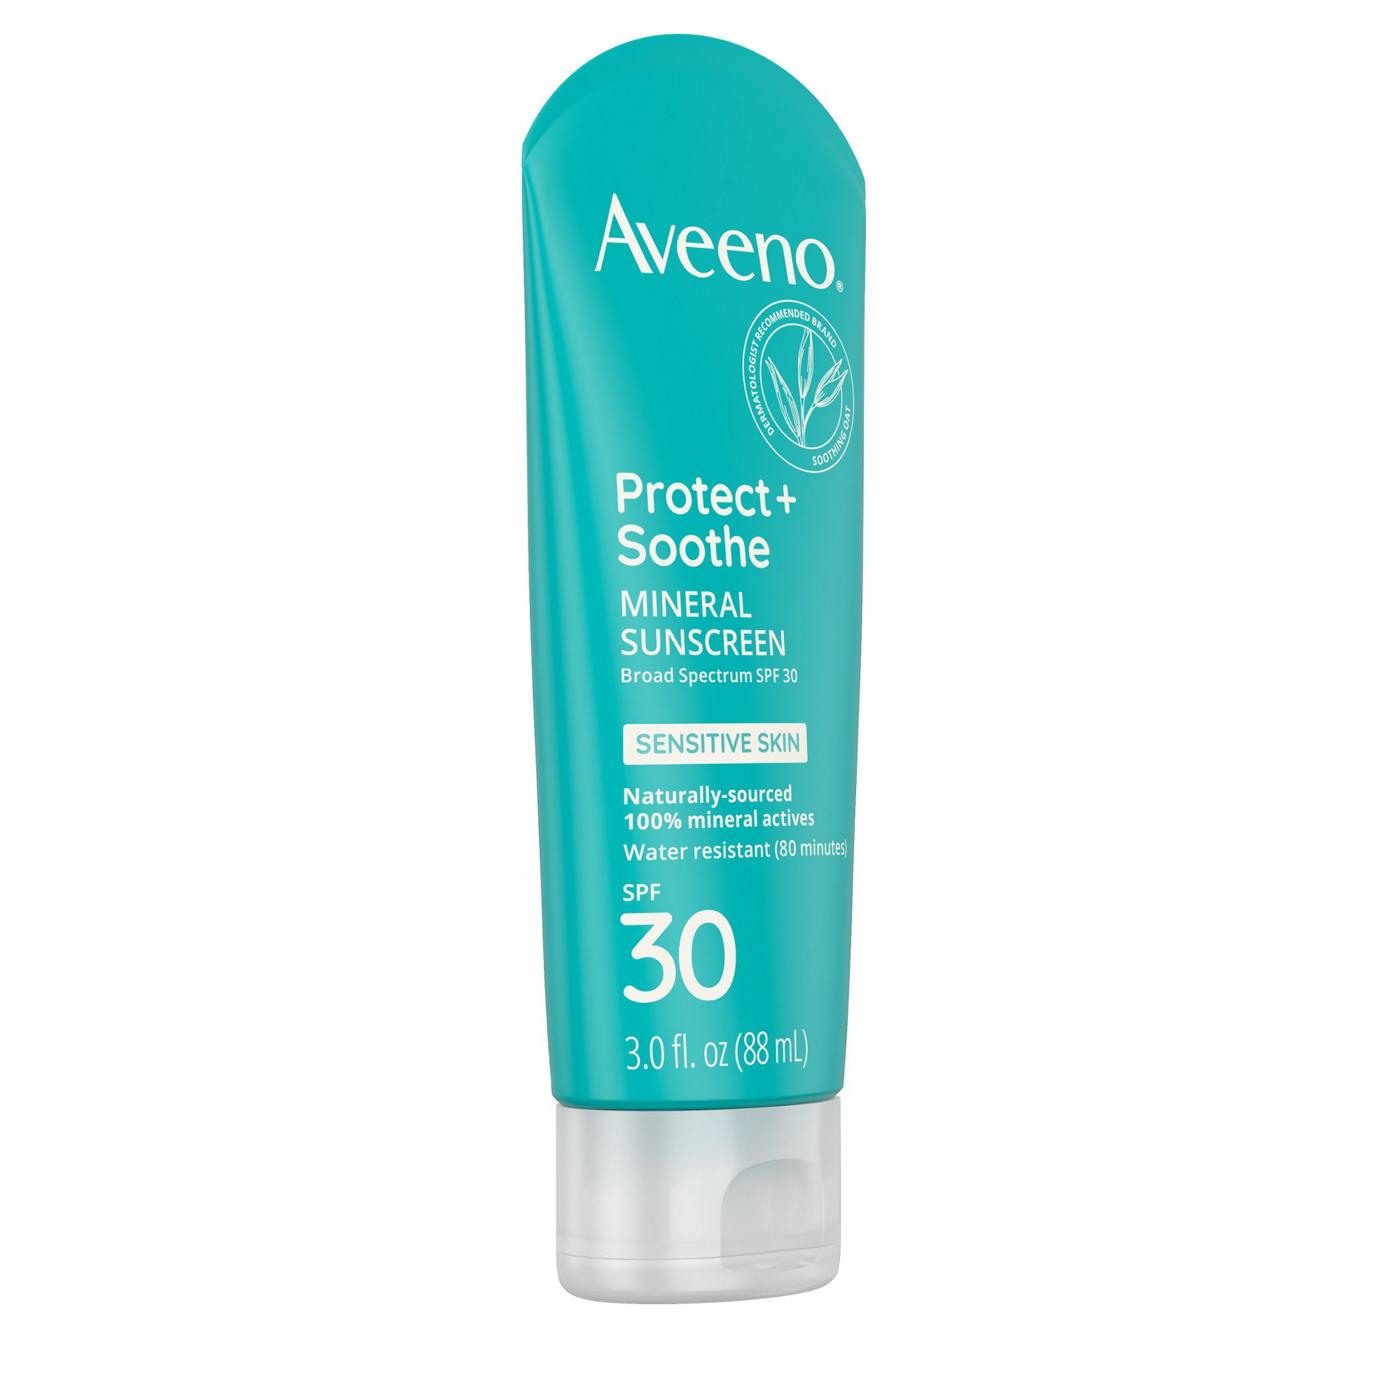 Aveeno Protect + Soothe Mineral Sunscreen Broad Spectrum SPF 30; image 7 of 8